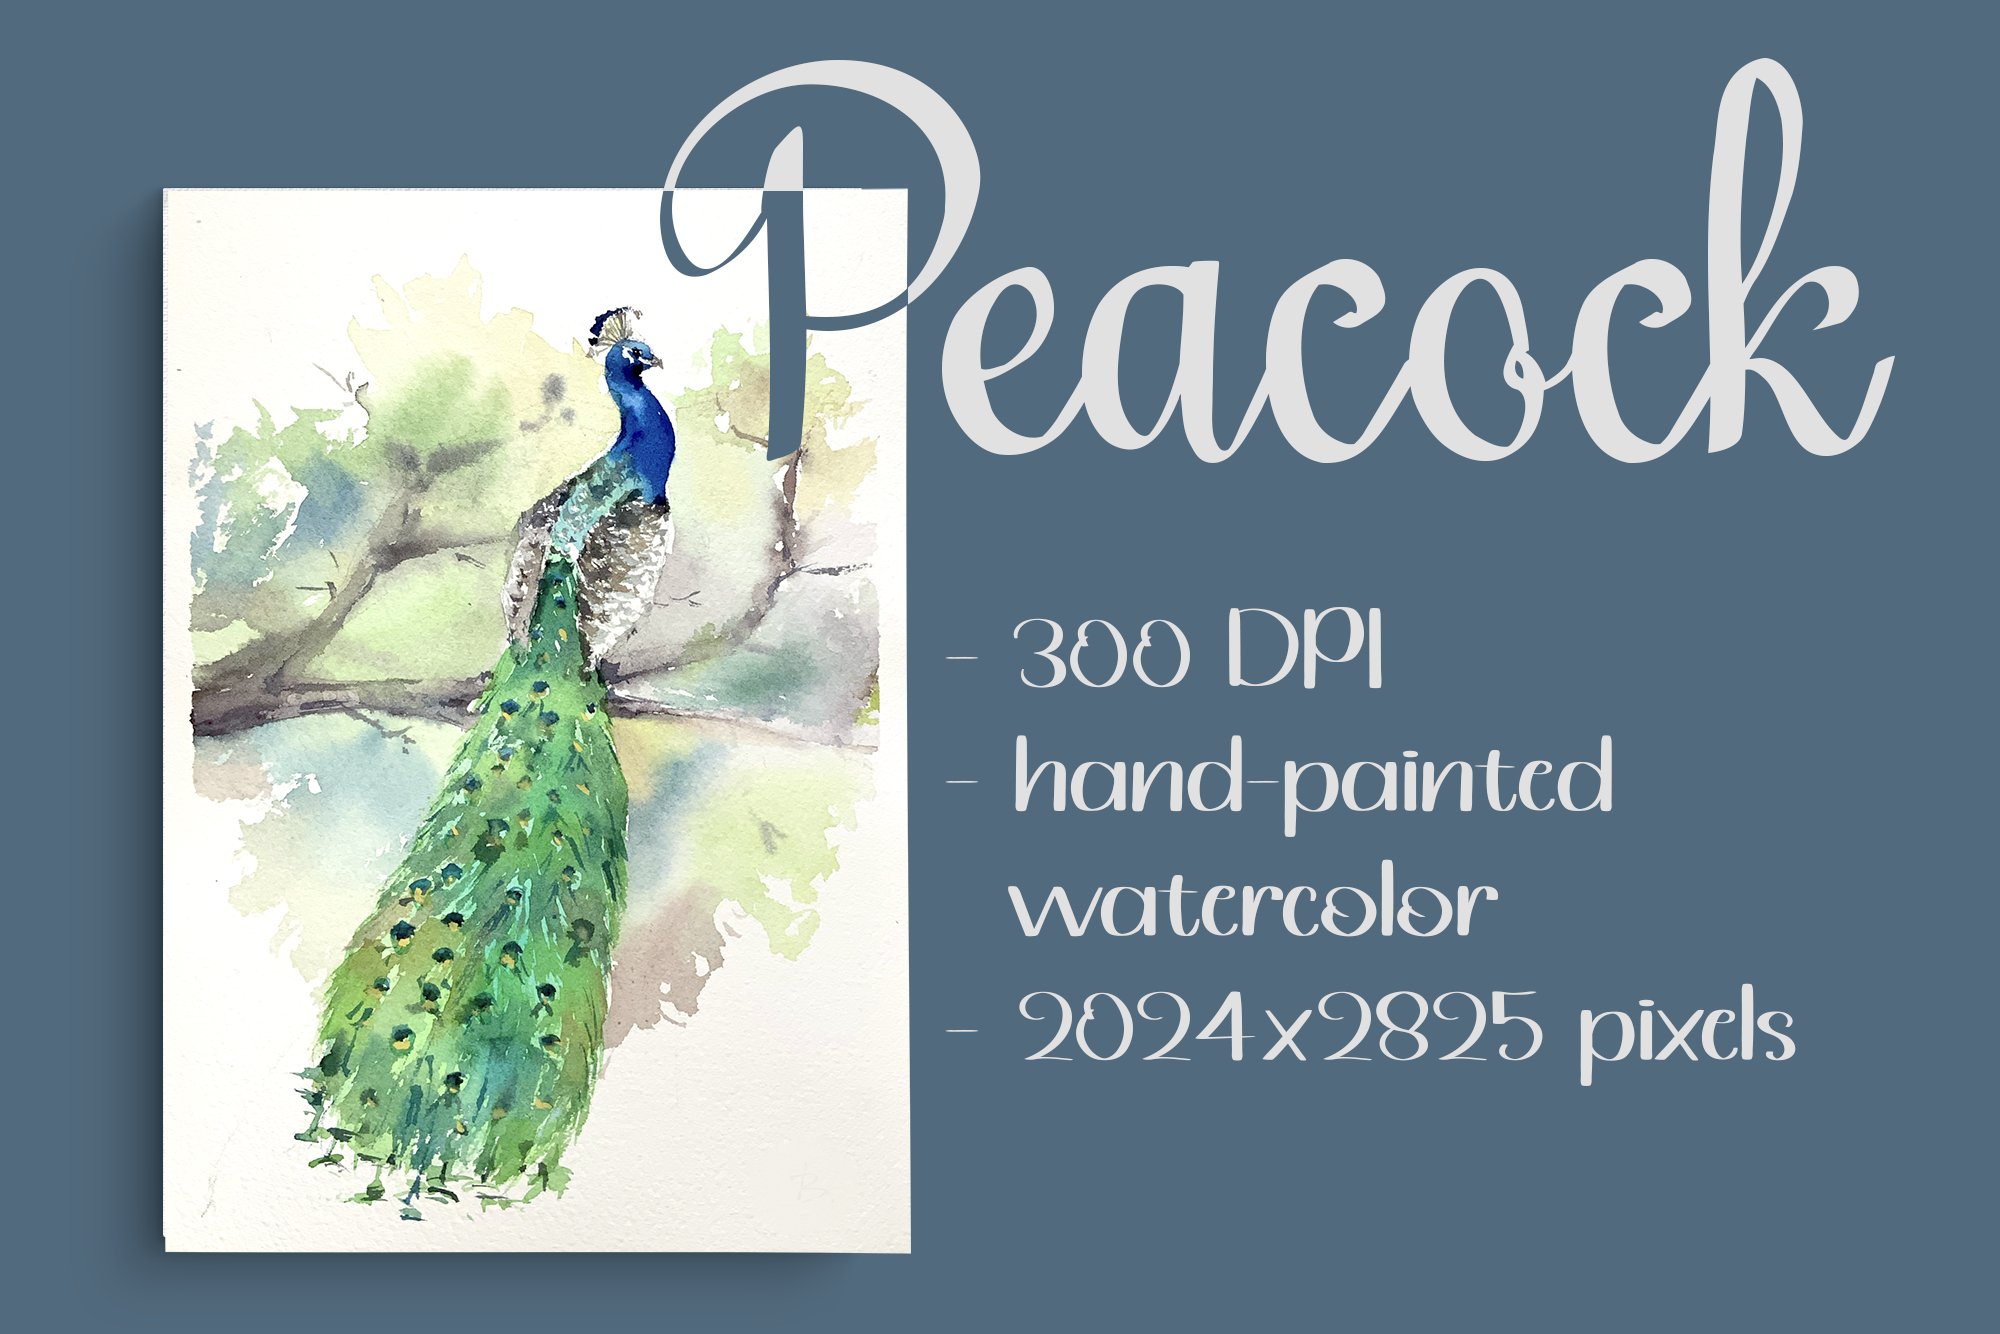 Watercolor Peacock Print & Clipart cover image.